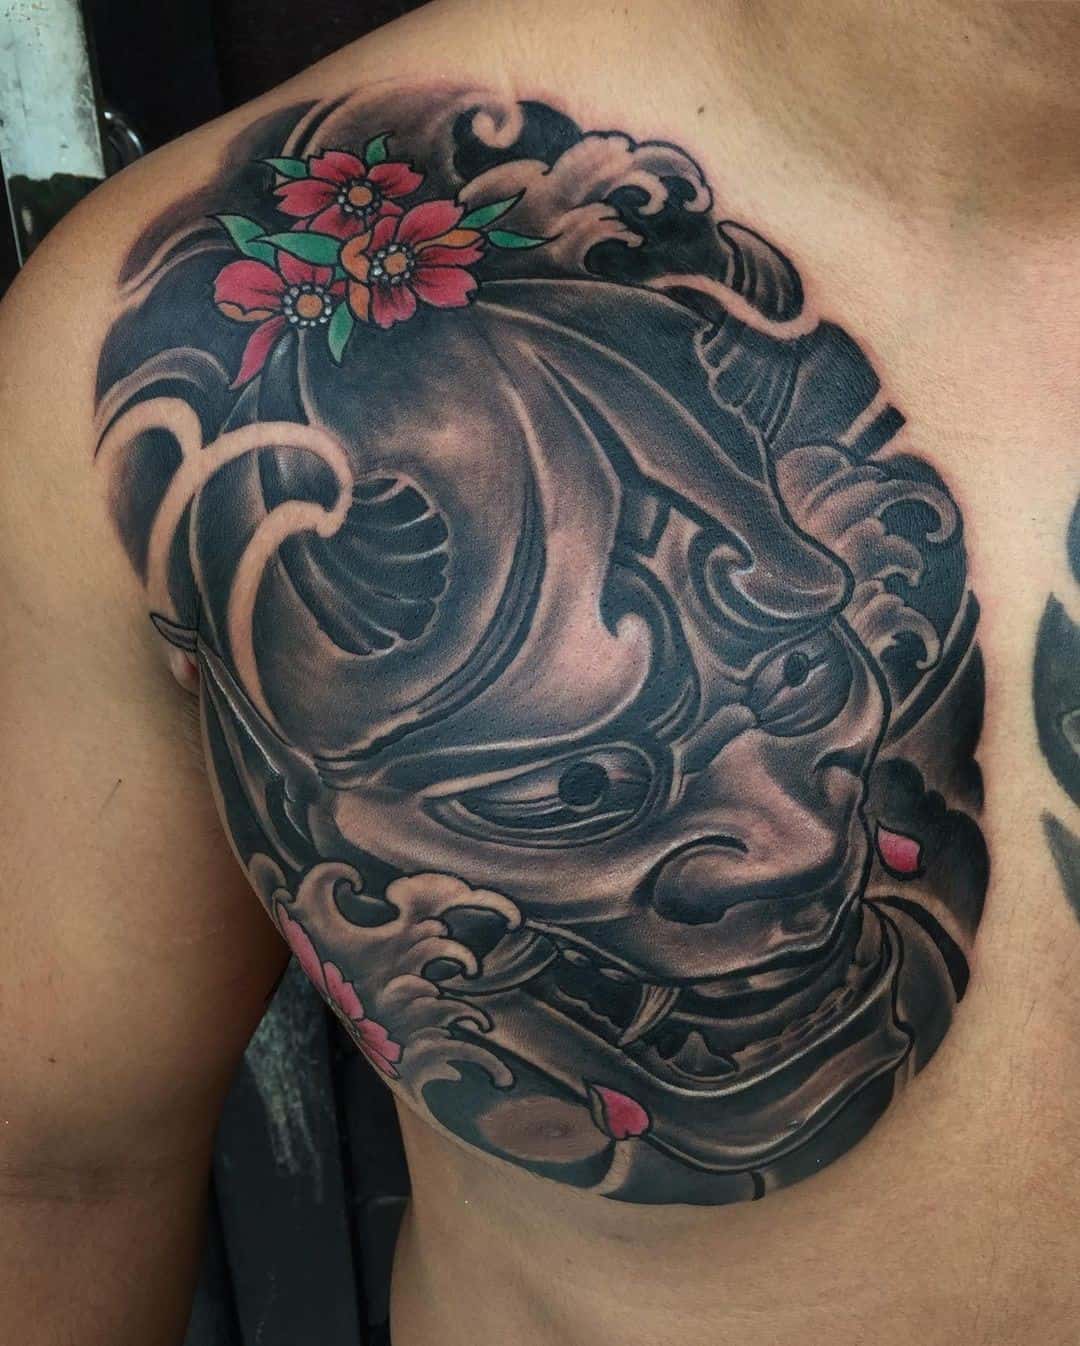 Samurai Mask Tattoo Meaning: Personal Stories and Symbolism Behind Body Art